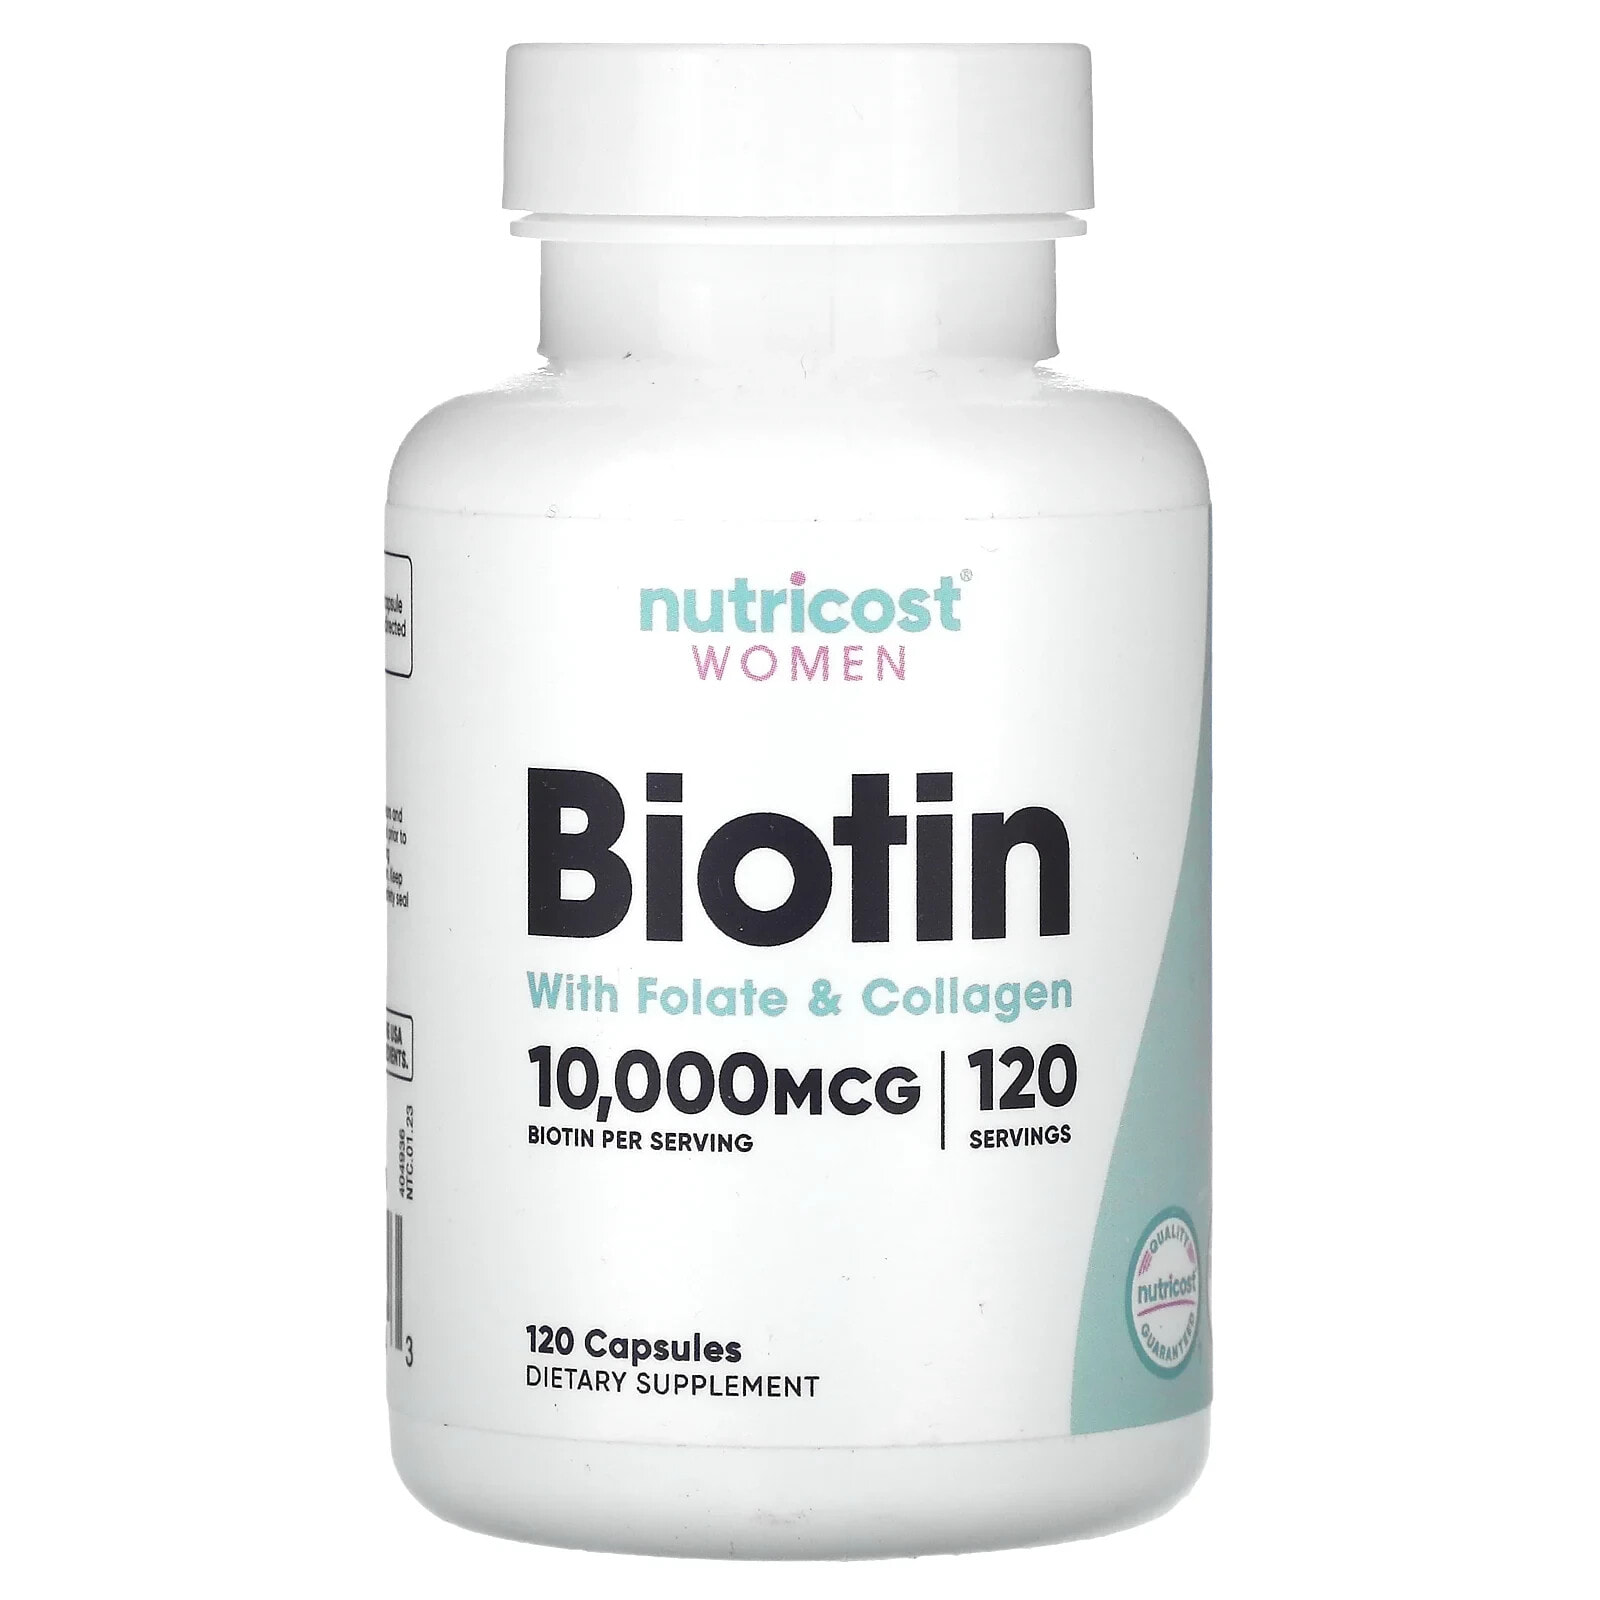 Nutricost, Women, Biotin With Folate & Collagen, 10,000 mcg, 120 Capsules